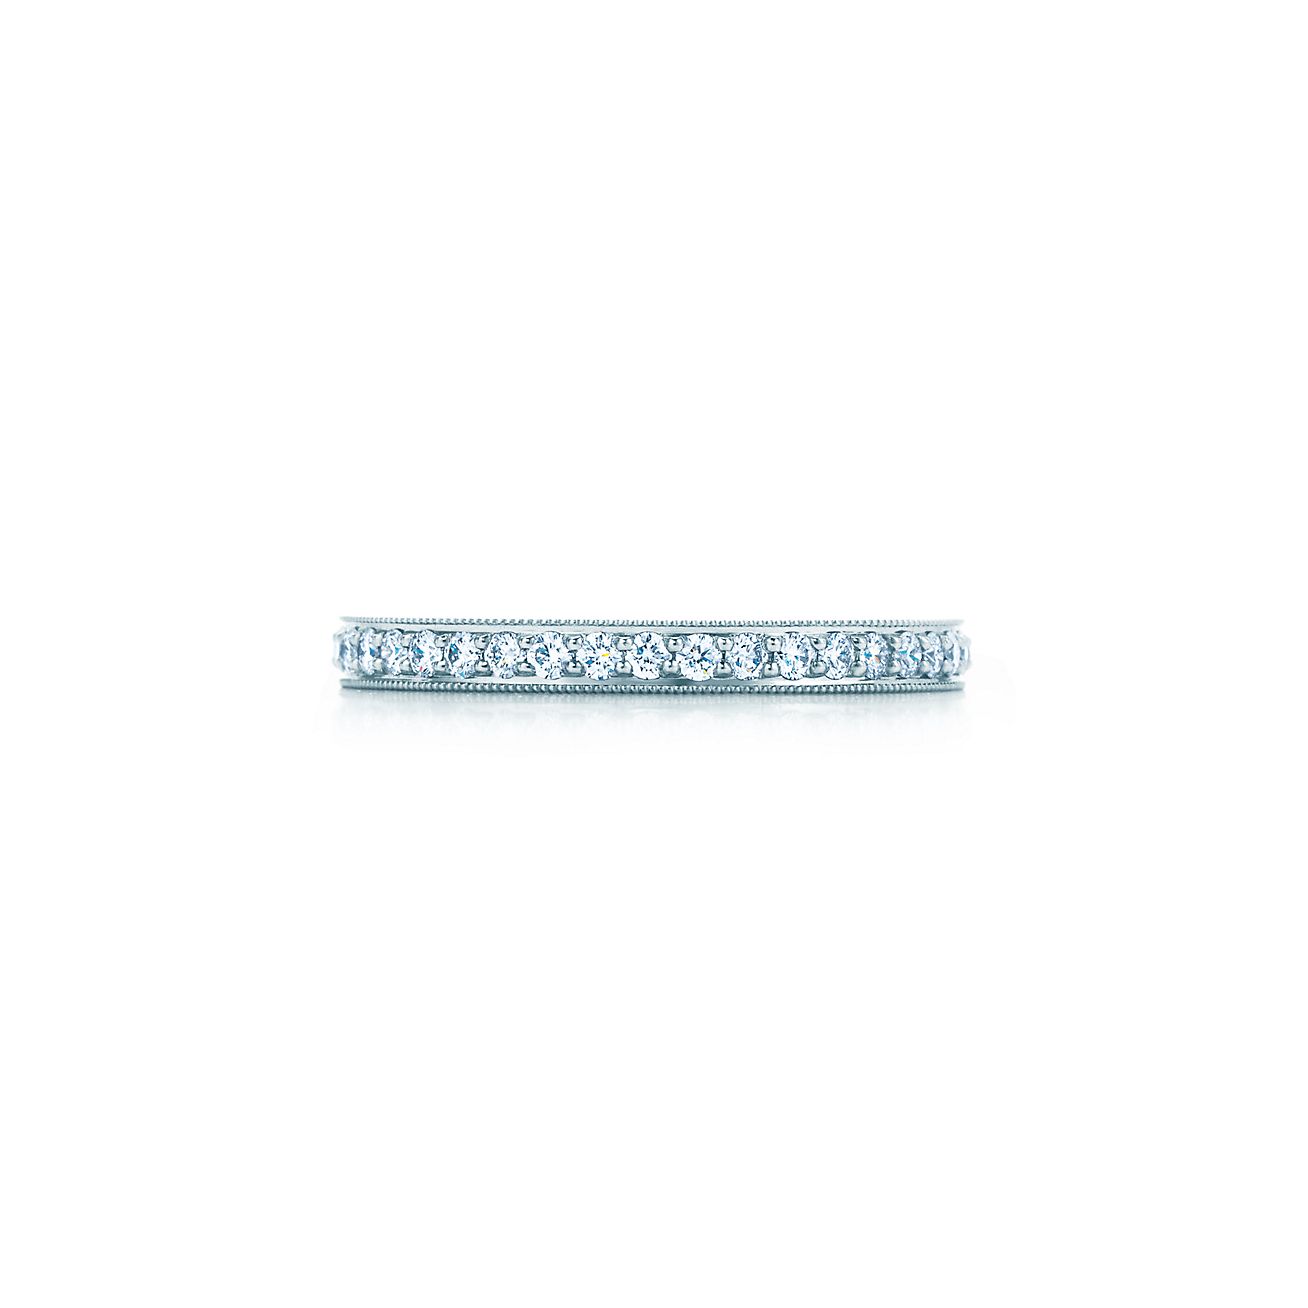 Tiffany Legacy Collection band ring in 